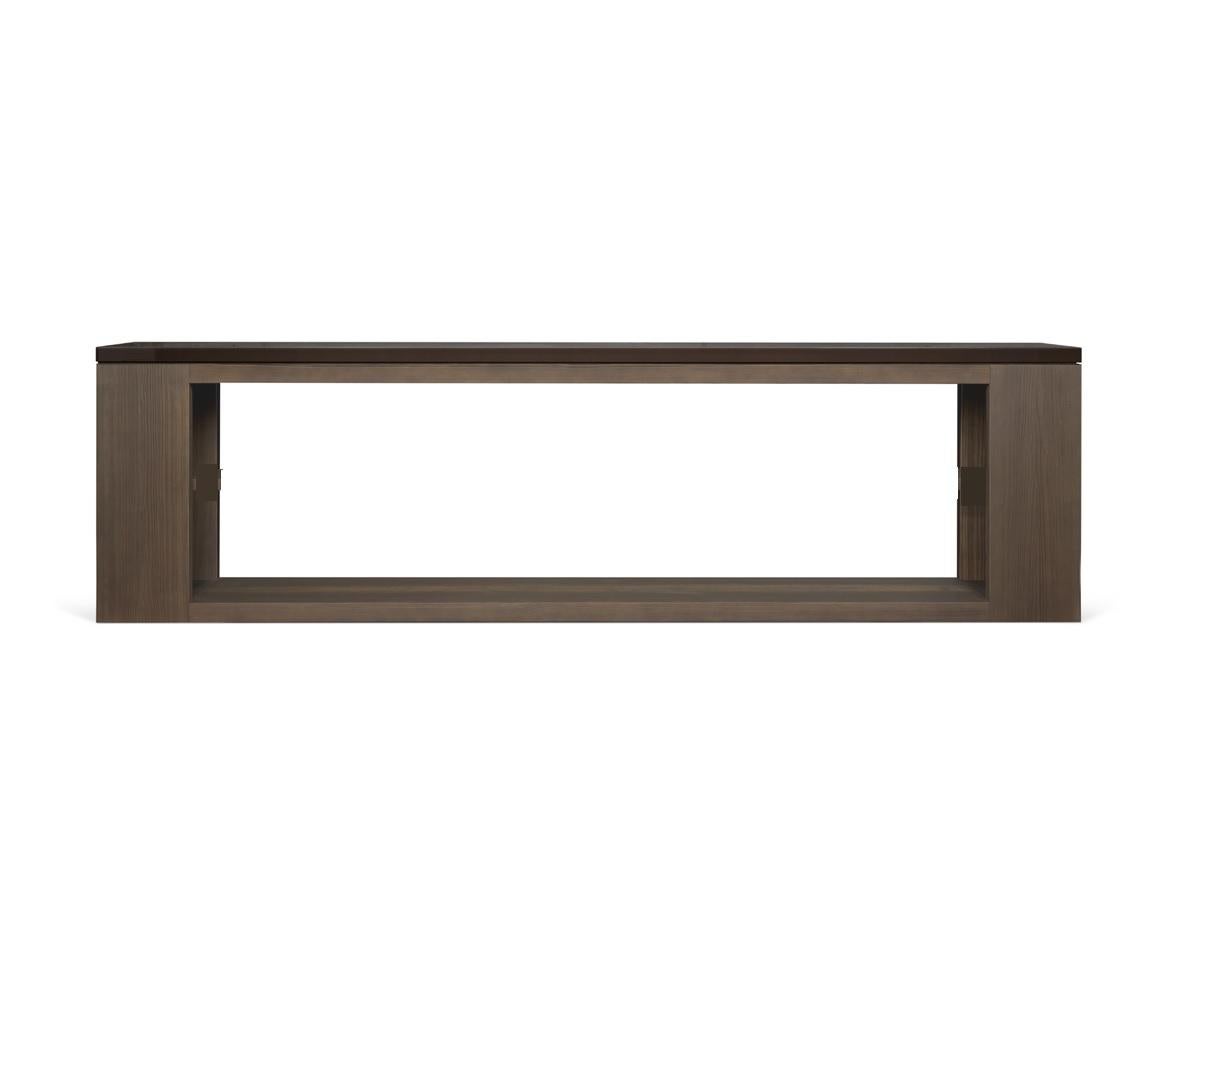 Corniac console without shelf by LK Edition
Dimensions: 300 x 44 x H 83 cm 
Materials: Tinted and brushed cedar and lacquer. 
Also available with a built-in shelf. 

It is with the sense of detail and requirement, this research of the exception